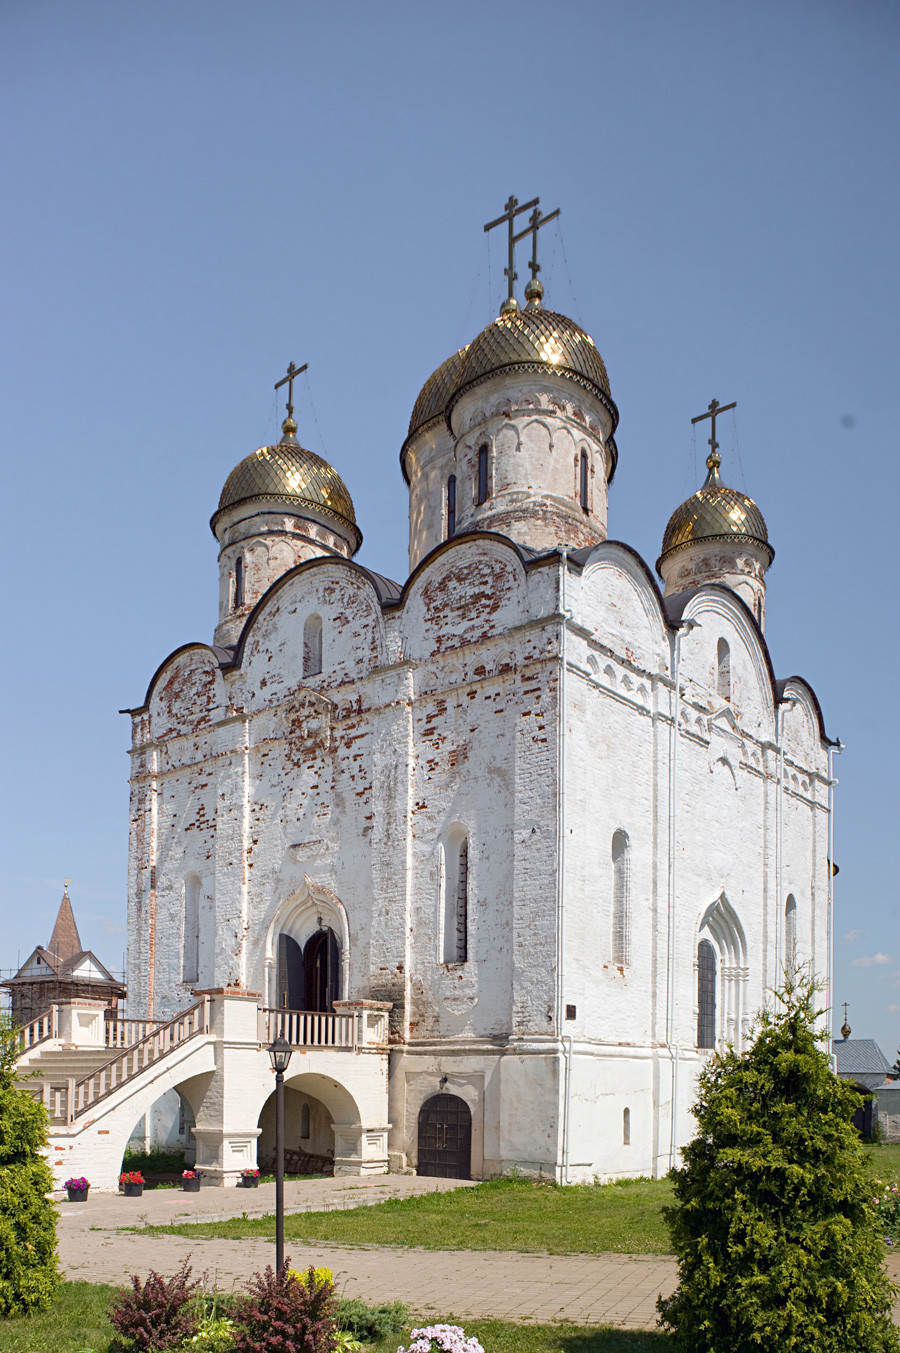 Luzhetsky Monastery. Cathedral of Nativity of the Virgin, southwest view. July 5, 2015.